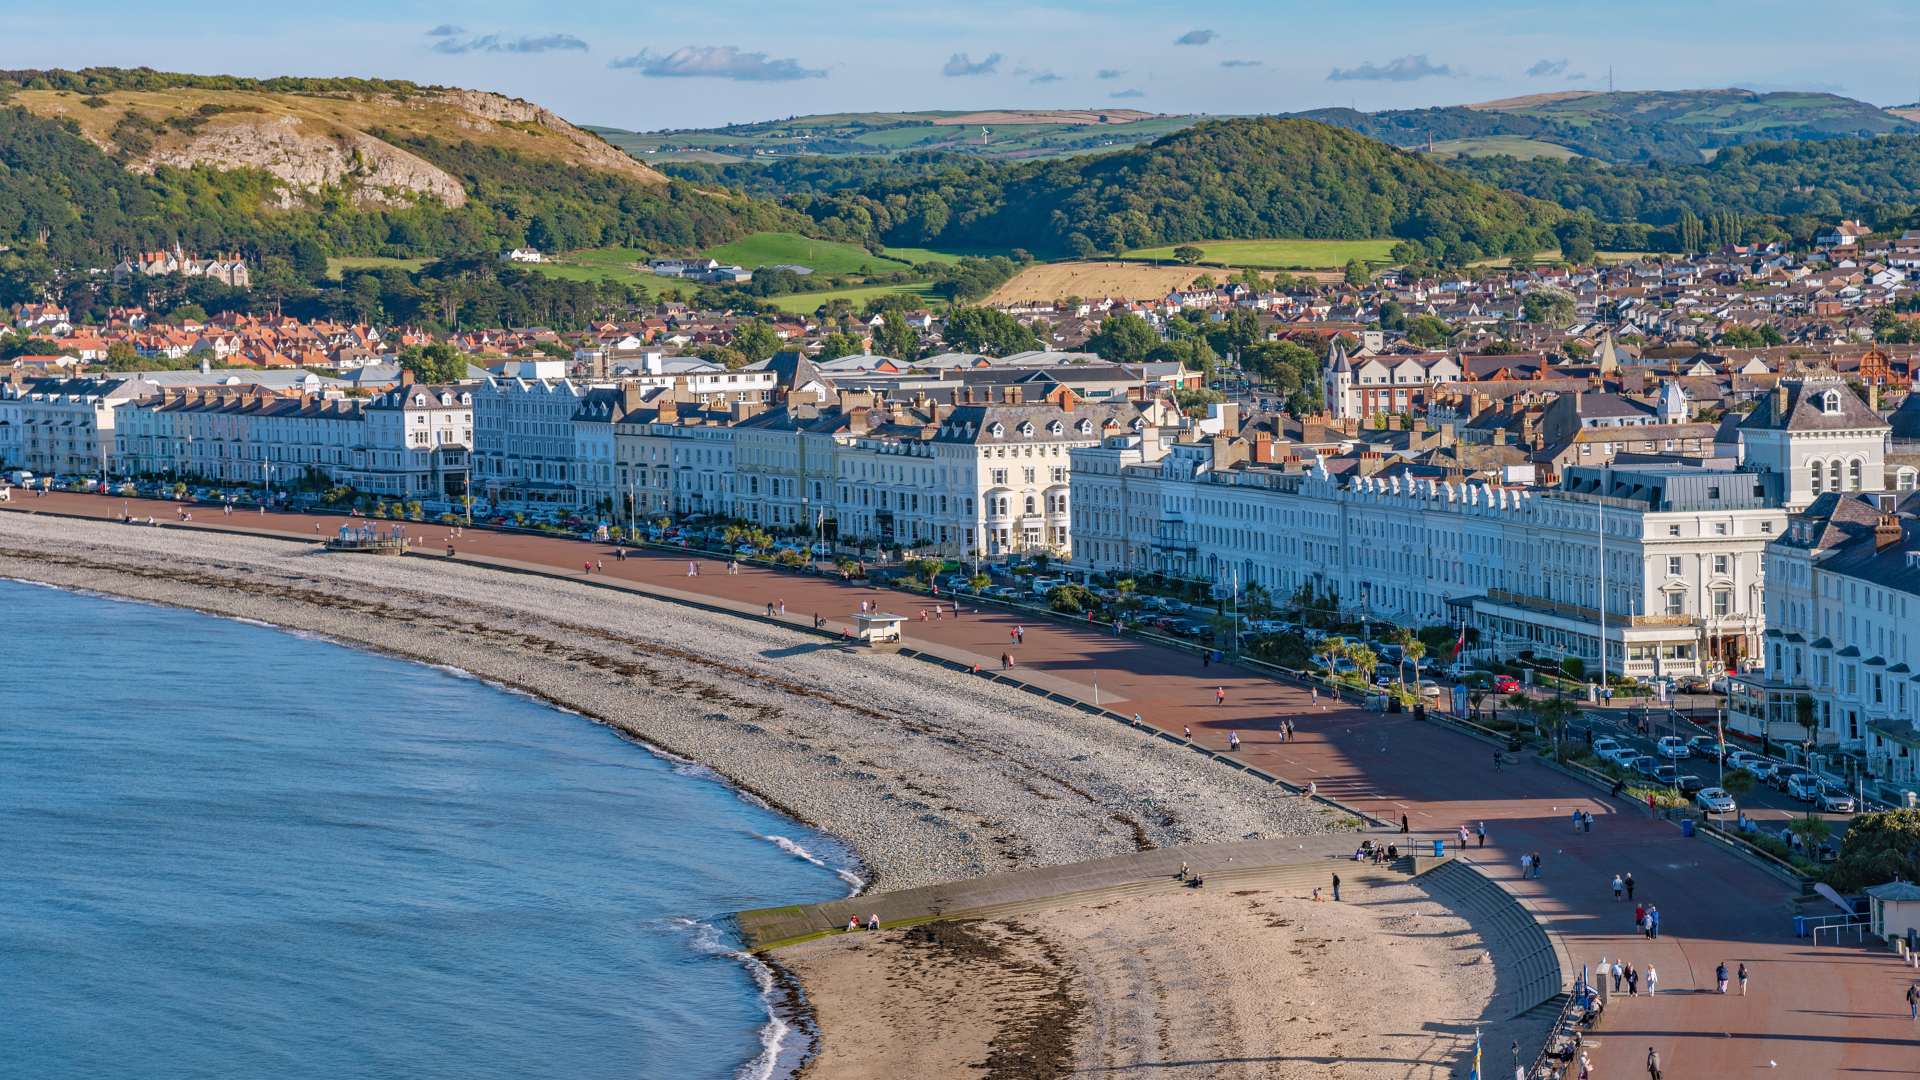 view of Llandudno seaside town and beach with rolling green hills behind